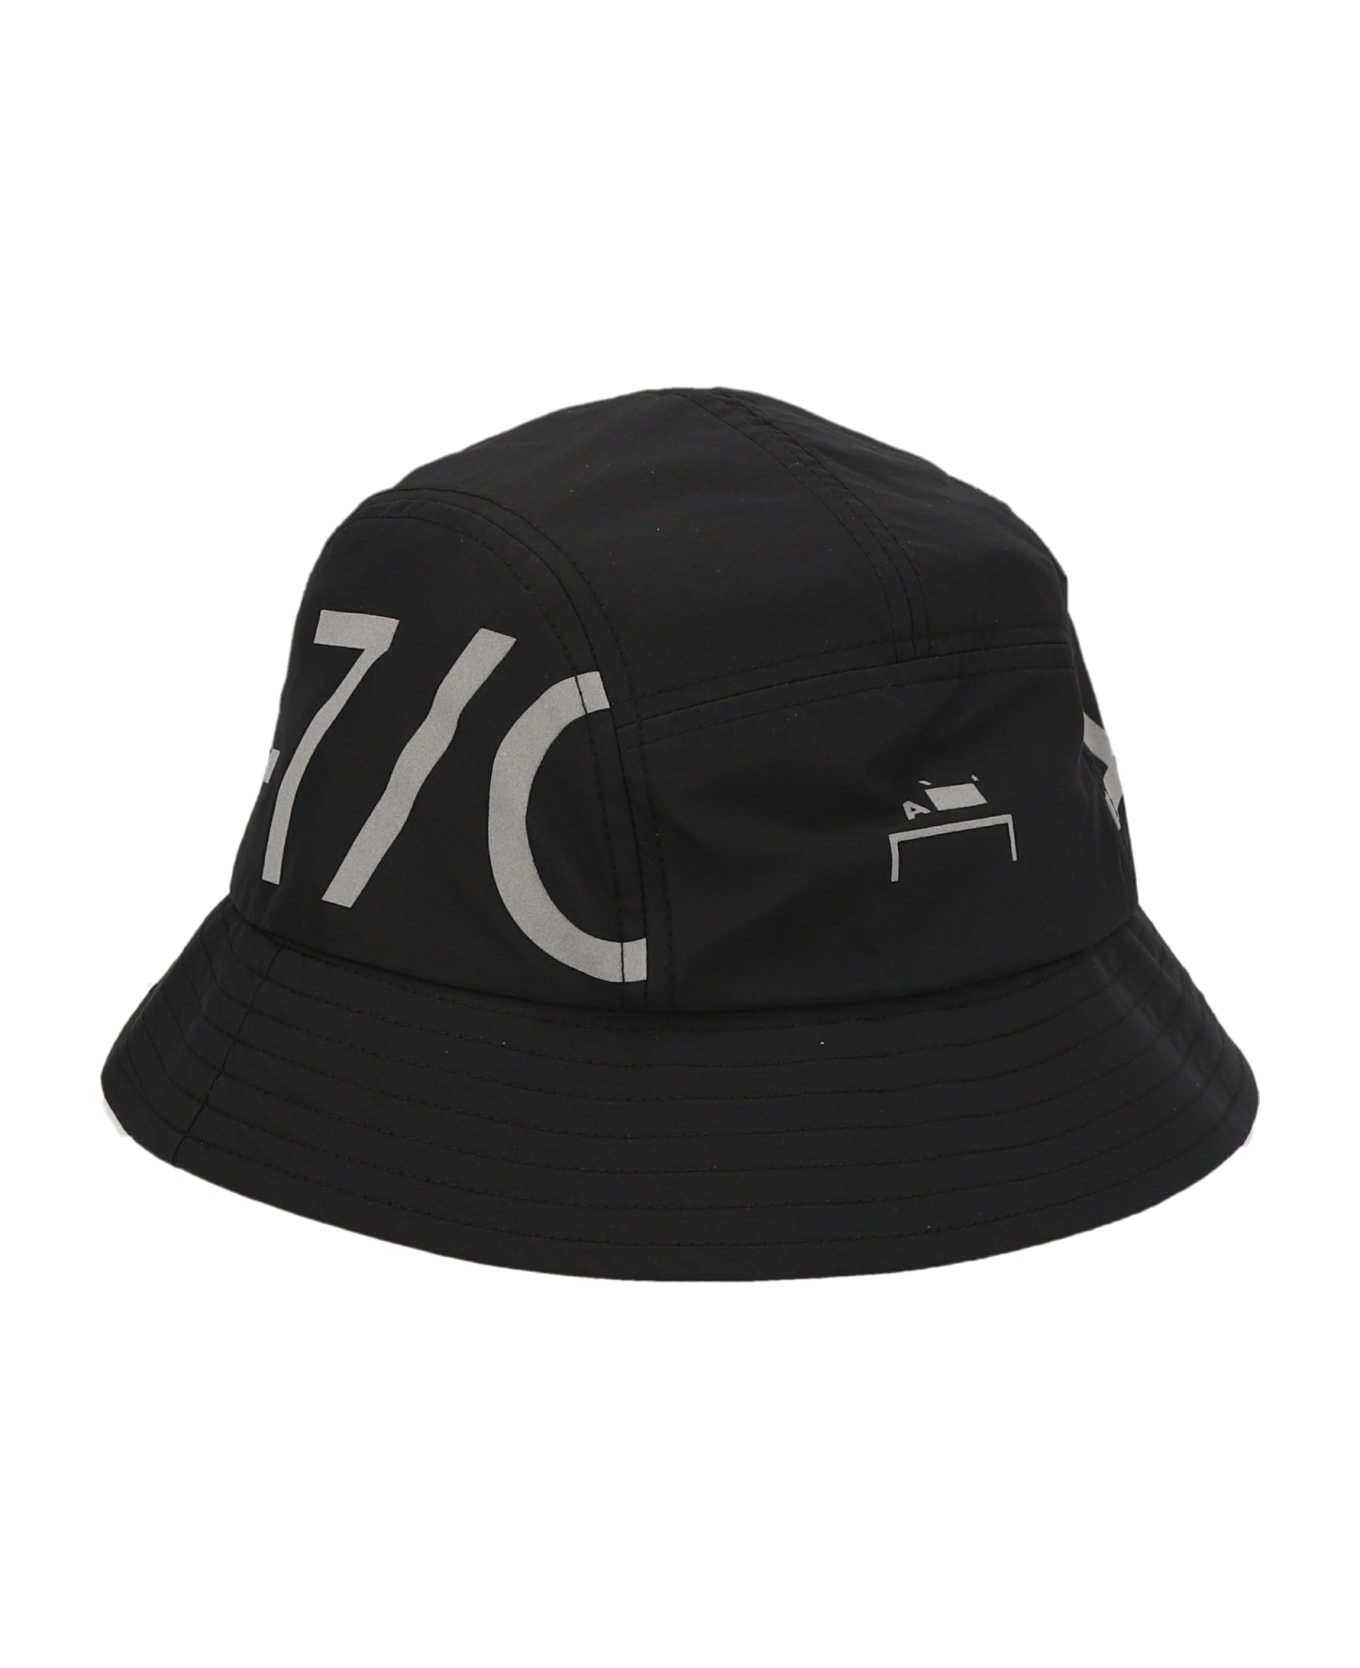 A-COLD-WALL 'cipher' Bucket Hat - Black  